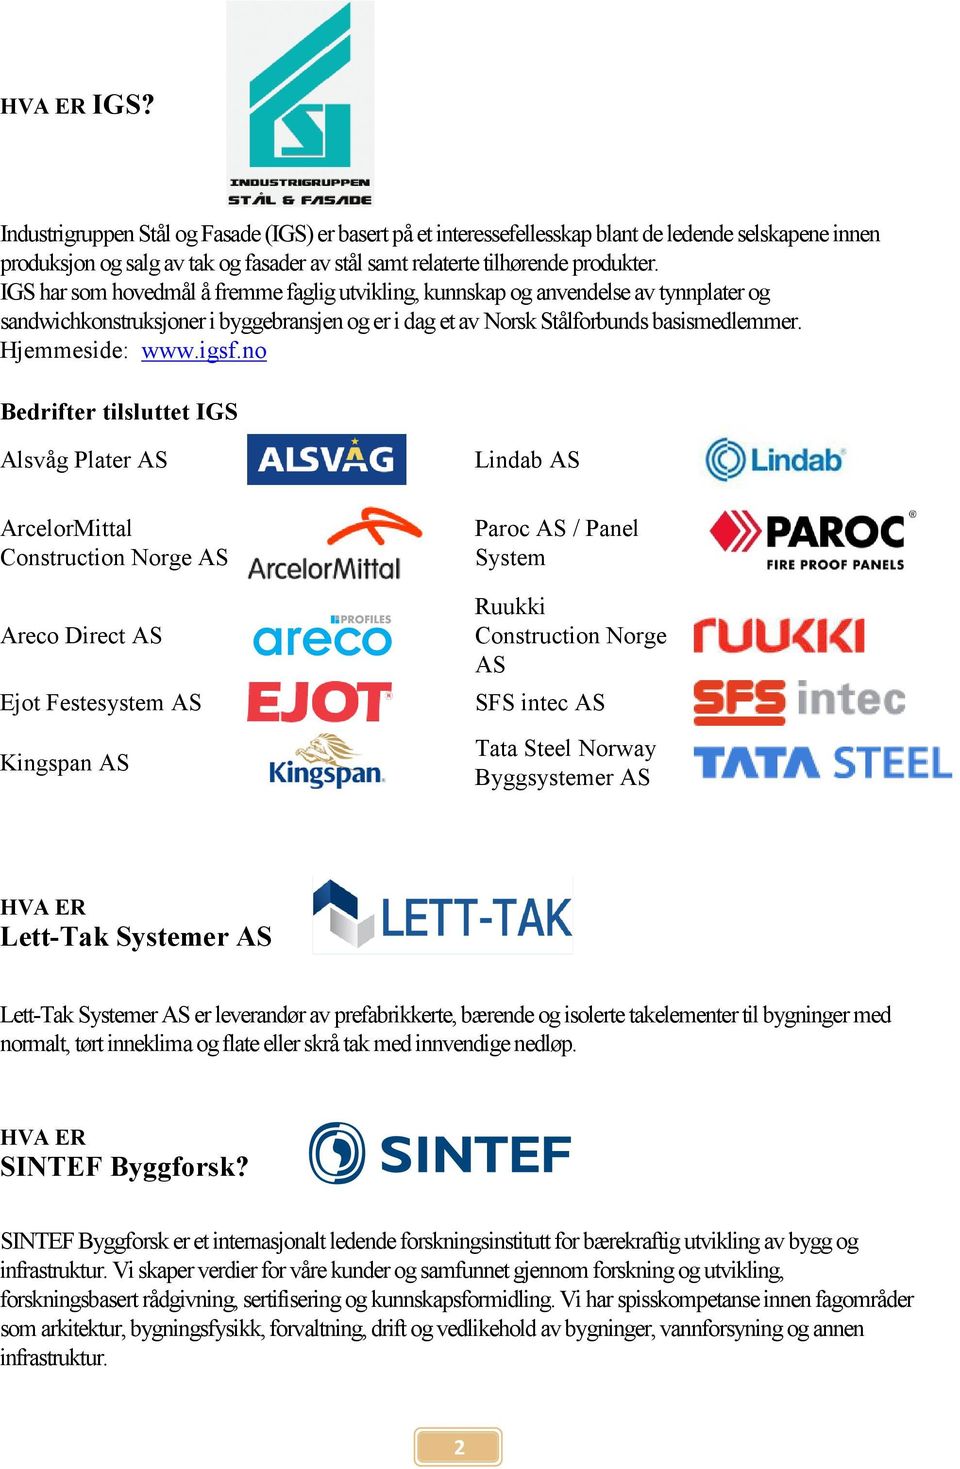 igsf.no Bedrifter tilsluttet IGS Alsvåg Plater AS ArcelorMittal Construction Norge AS Areco Direct AS Ejot Festesystem AS Kingspan AS Lindab AS Paroc AS / Panel System Ruukki Construction Norge AS